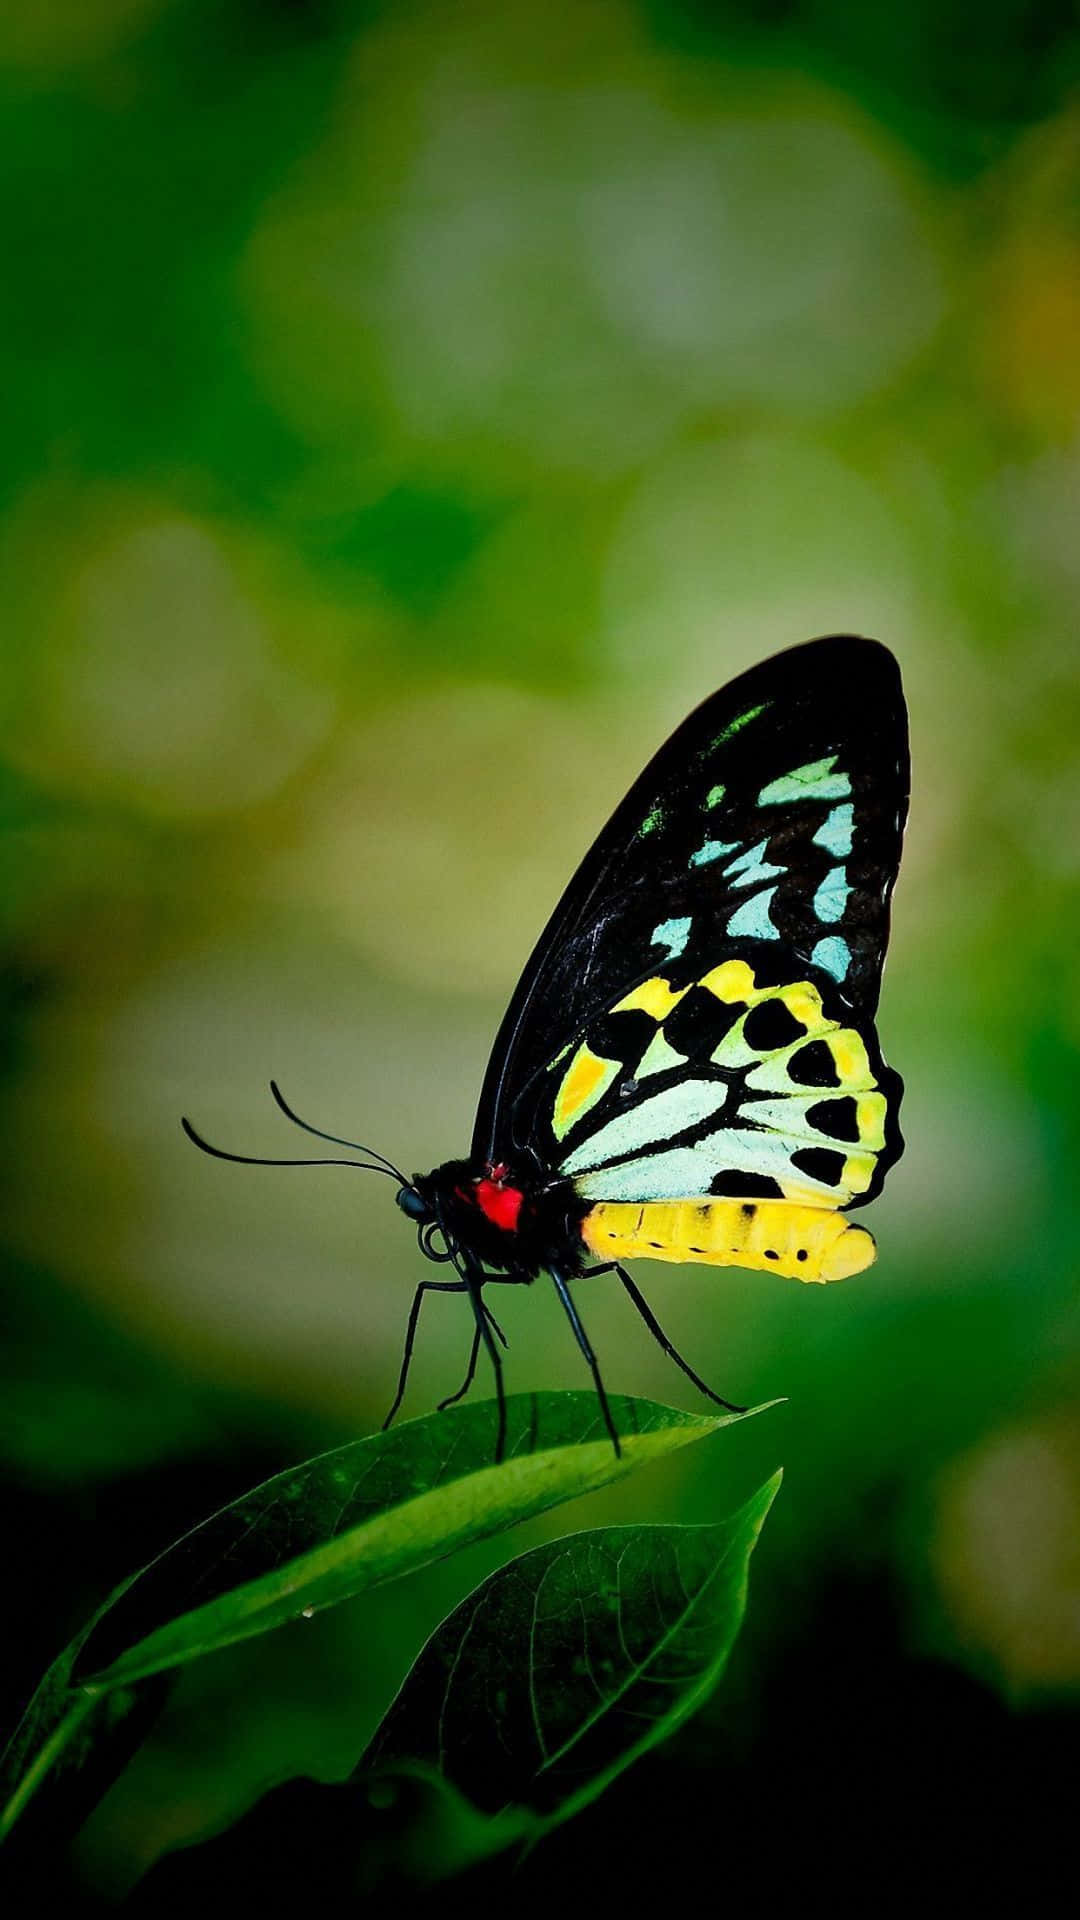 A vibrant butterfly basks in the warm sunlight" Wallpaper